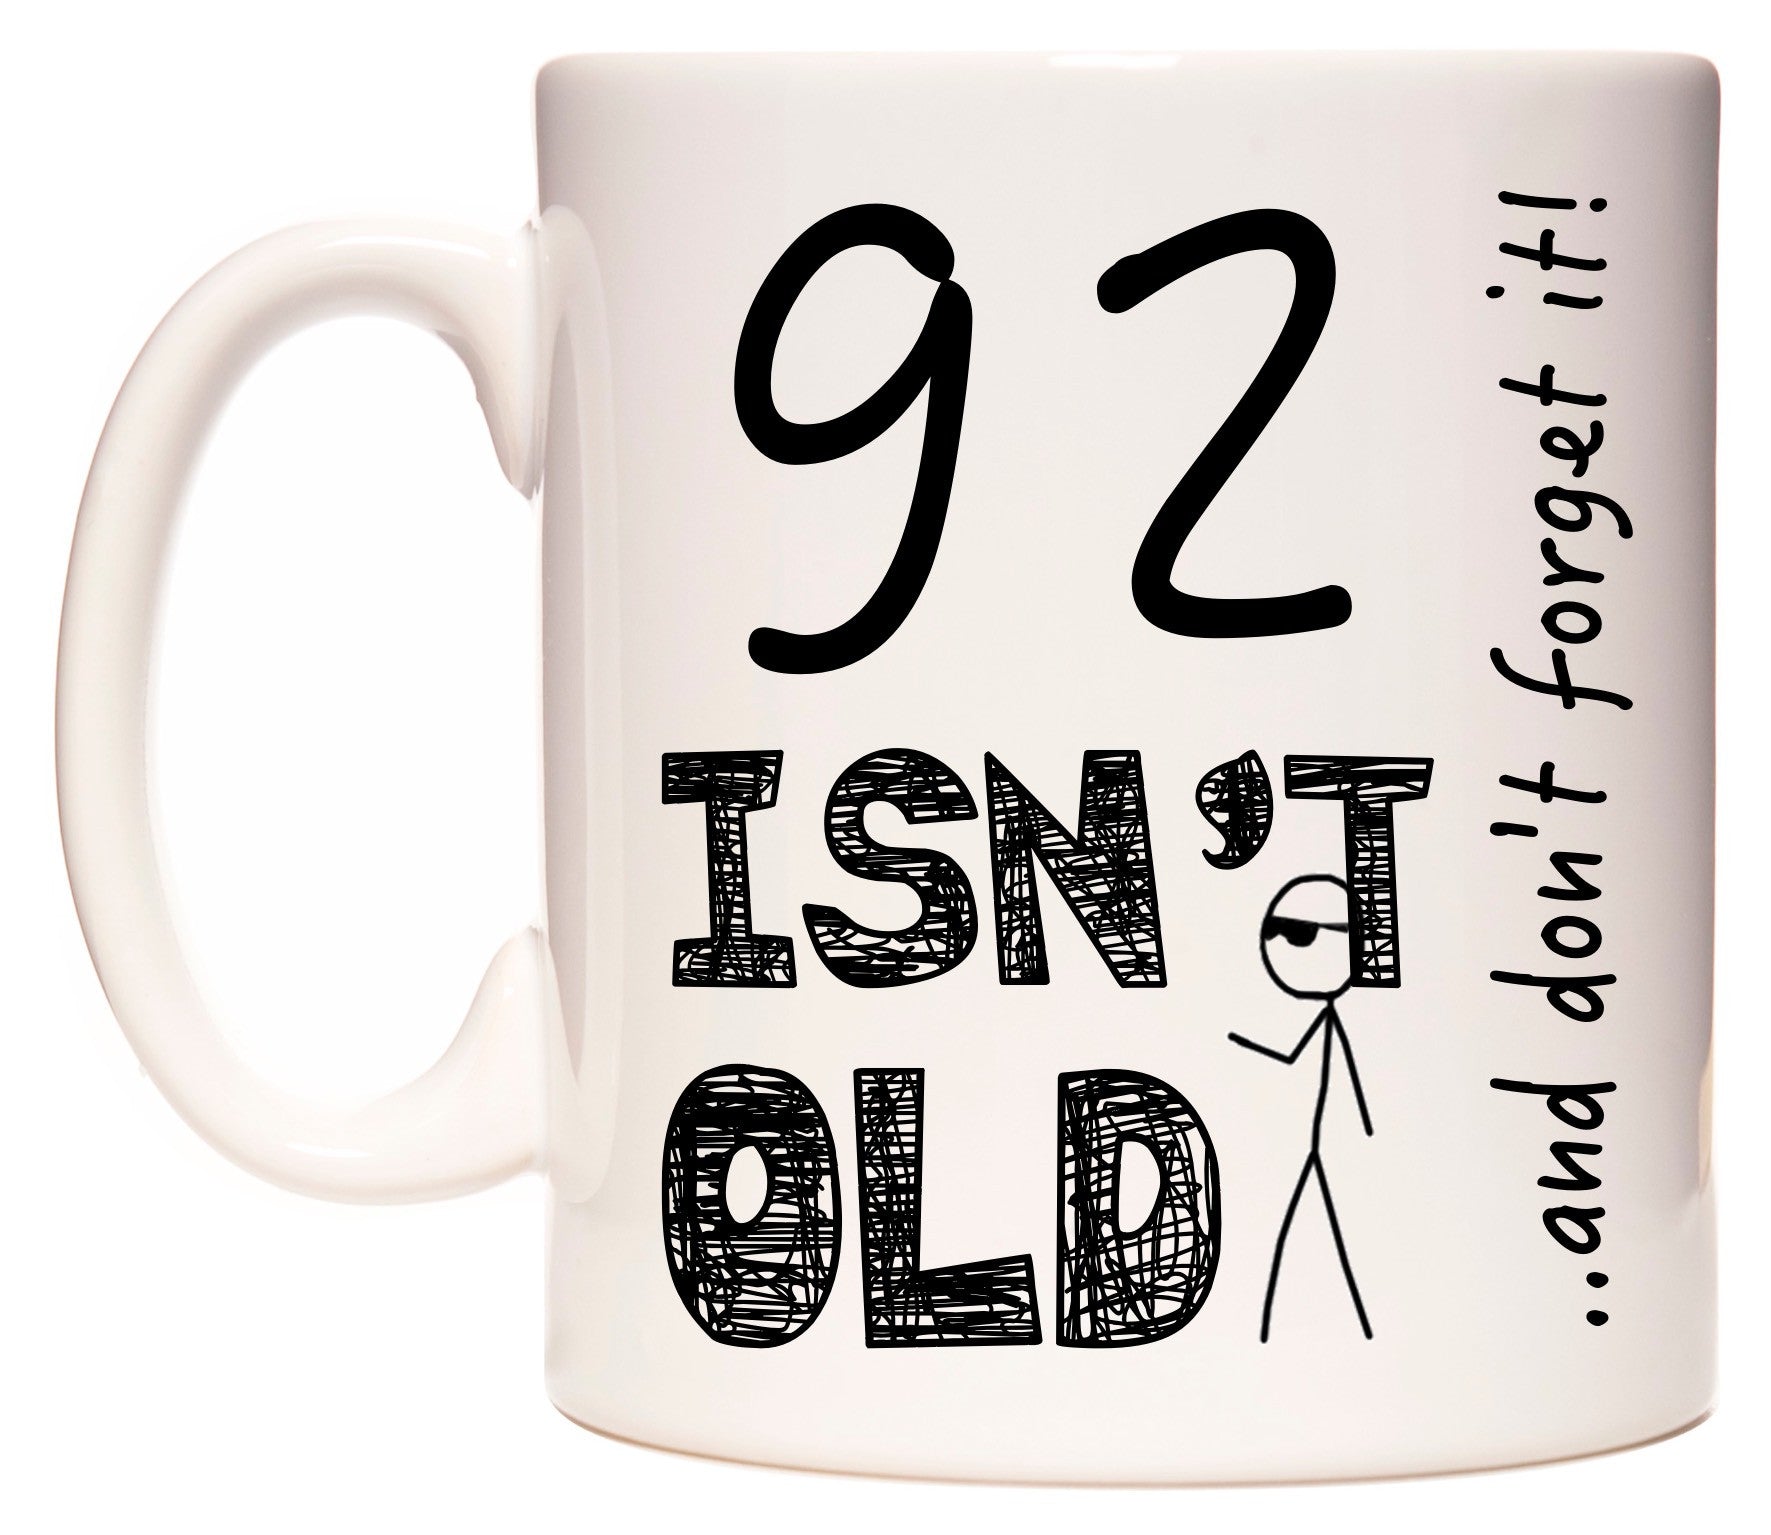 This mug features 92 Isn't Old